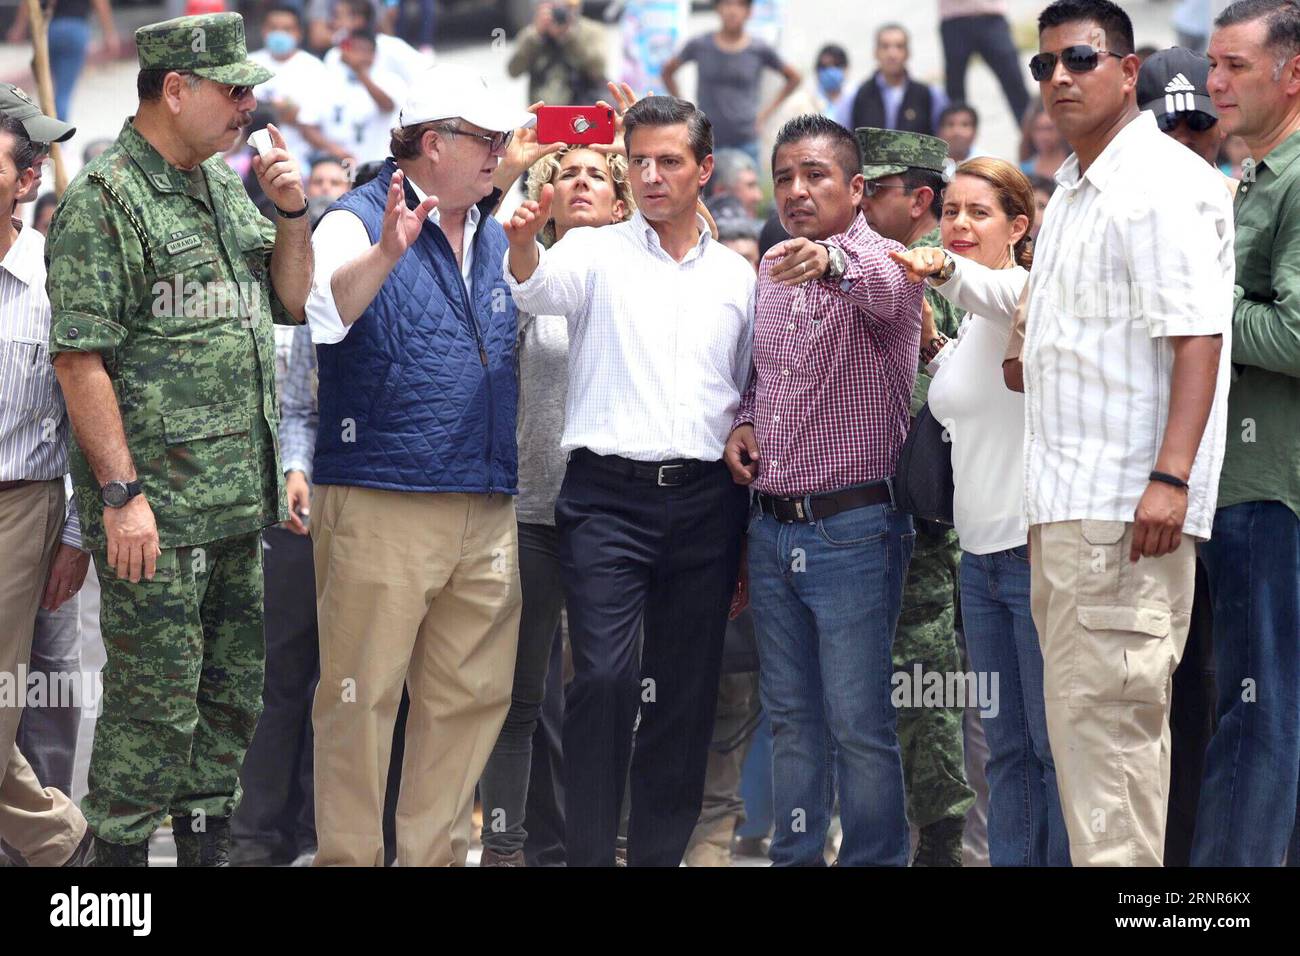 (170920) -- MORELOS (MEXICO), Sept. 20, 2017 -- Mexican President Enrique Pena Nieto (C) inspects the rescue work in Jojutla, state of Morelos, Mexico, on Sept. 20, 2017. Mexico s President Enrique Pena Nieto decreed three days of national mourning on Wednesday for the victims of the powerful quake that killed over 200 people and toppled buildings in central Mexico on Tuesday. ) (ma) (vf) MEXICO-MORELOS-EARTHQUAKE ArmandoxSolis PUBLICATIONxNOTxINxCHN Stock Photo